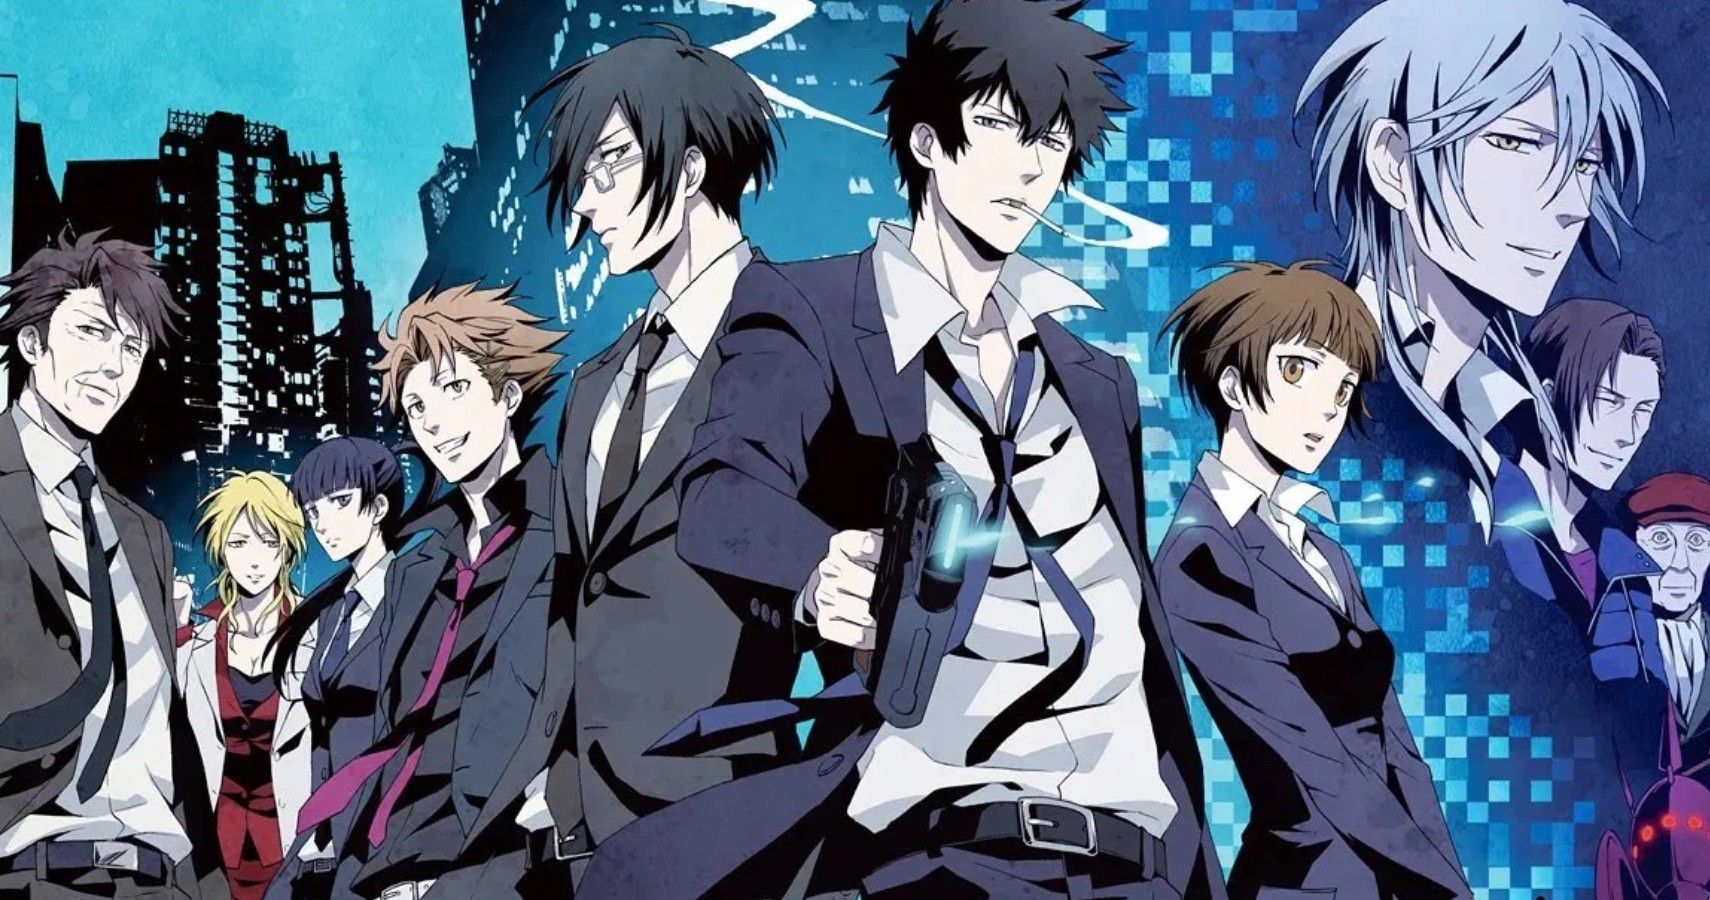 PsychoPass to Get LiveAction Stage Play